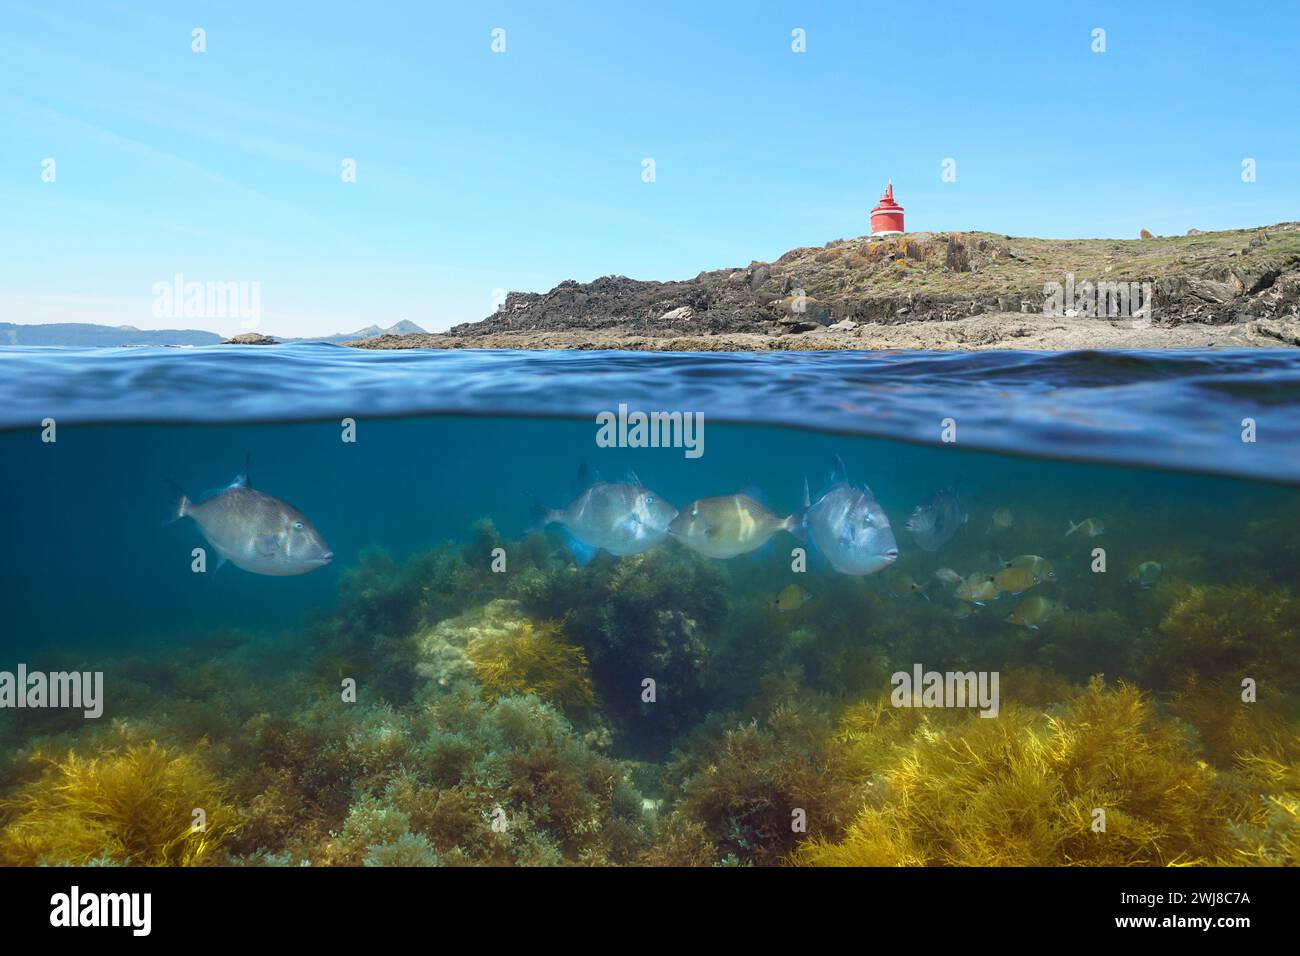 Rocky coast with a lighthouse and fish with algae underwater in the Atlantic ocean, split view half over and under water surface, natural scene, Spain Stock Photo